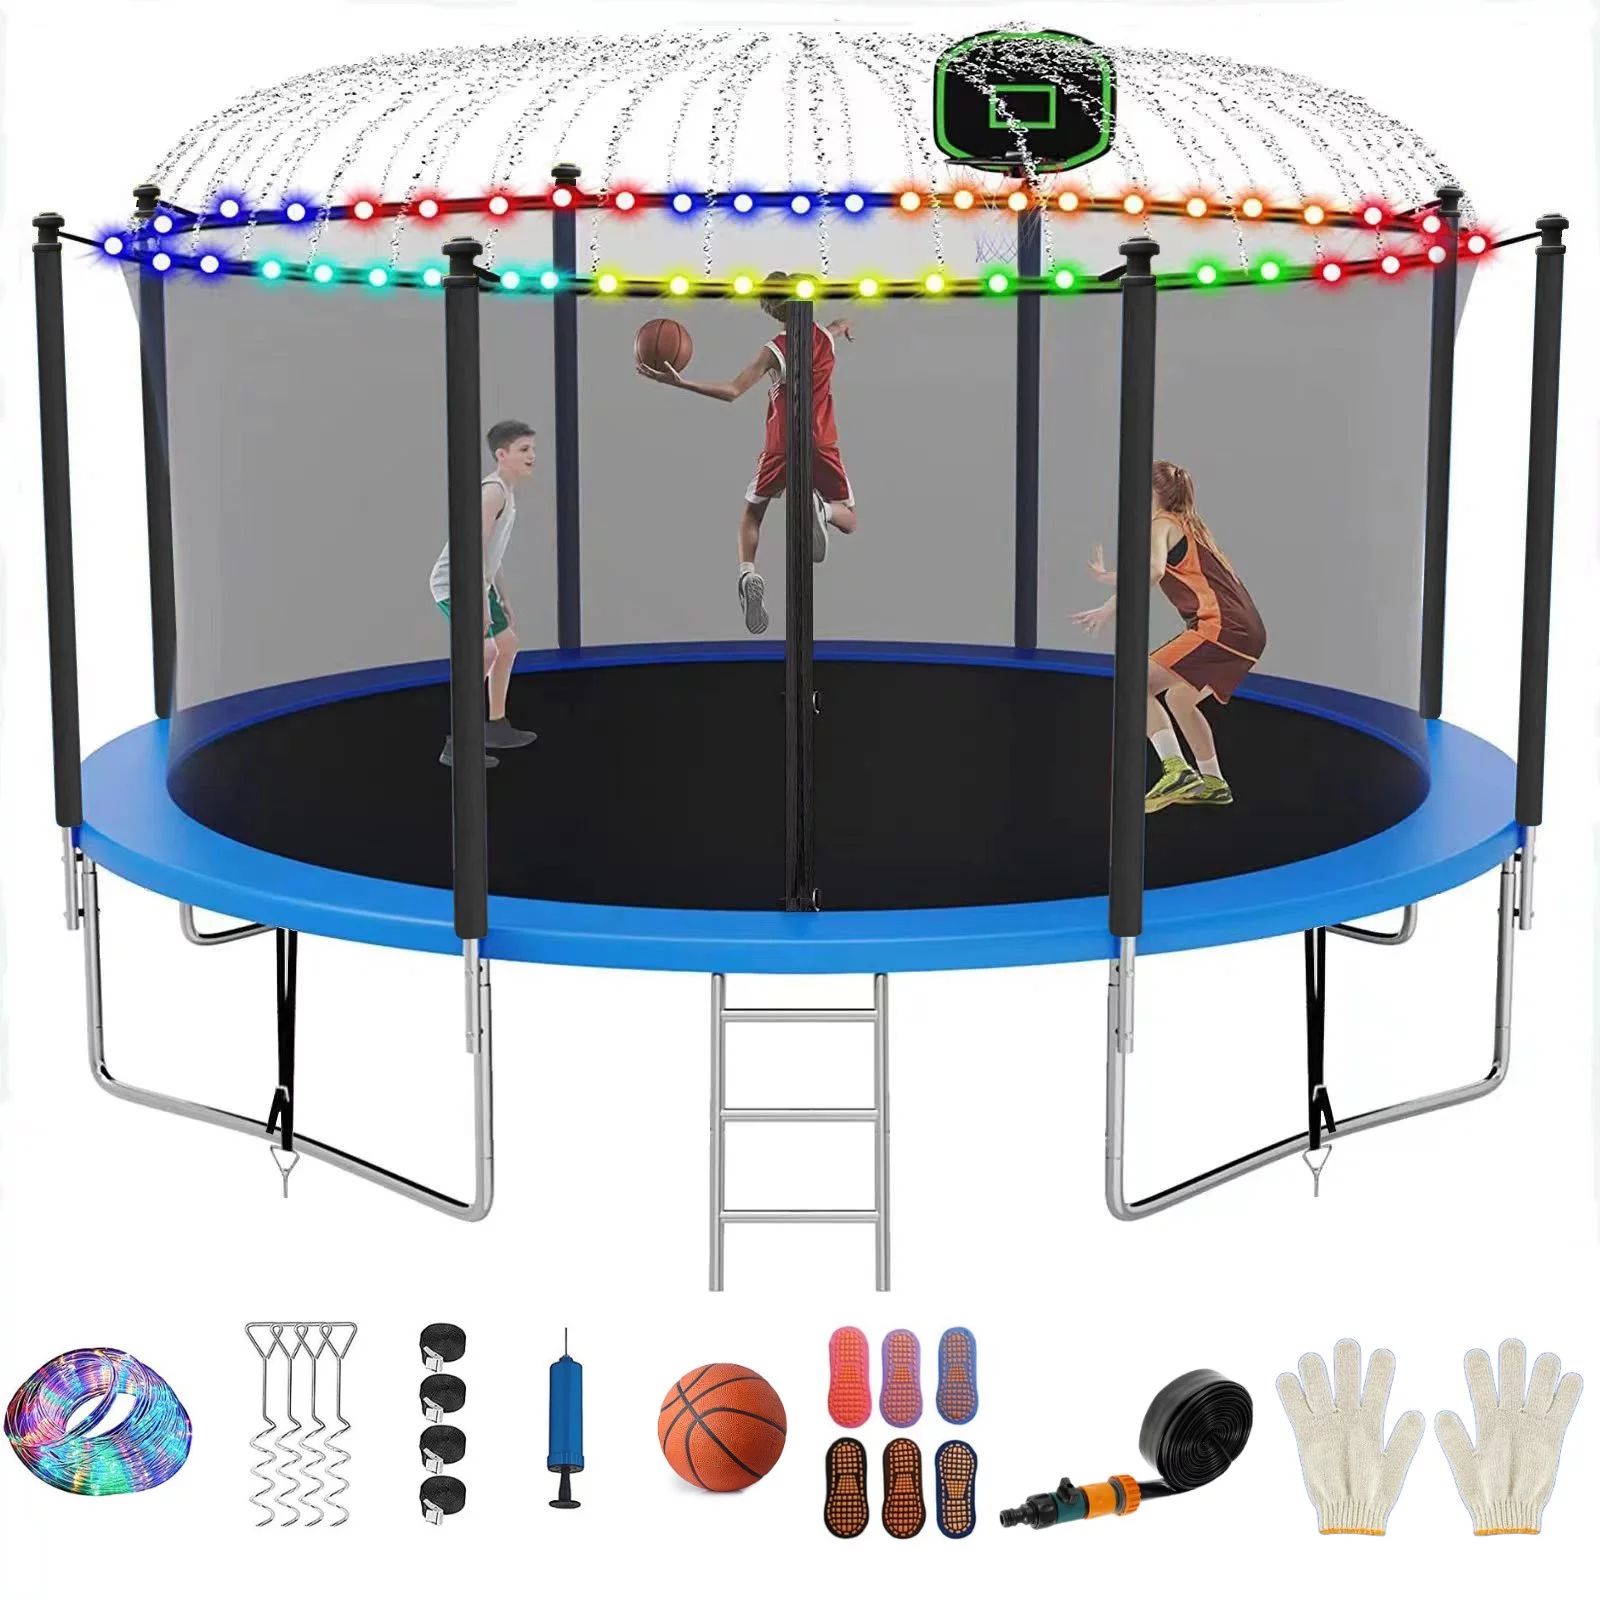 FIZITI 12FT 990LBS Trampoline for Adults/Kids,Outdoor Trampoline with Enclosure Net,Basketball Ho... | Walmart (US)